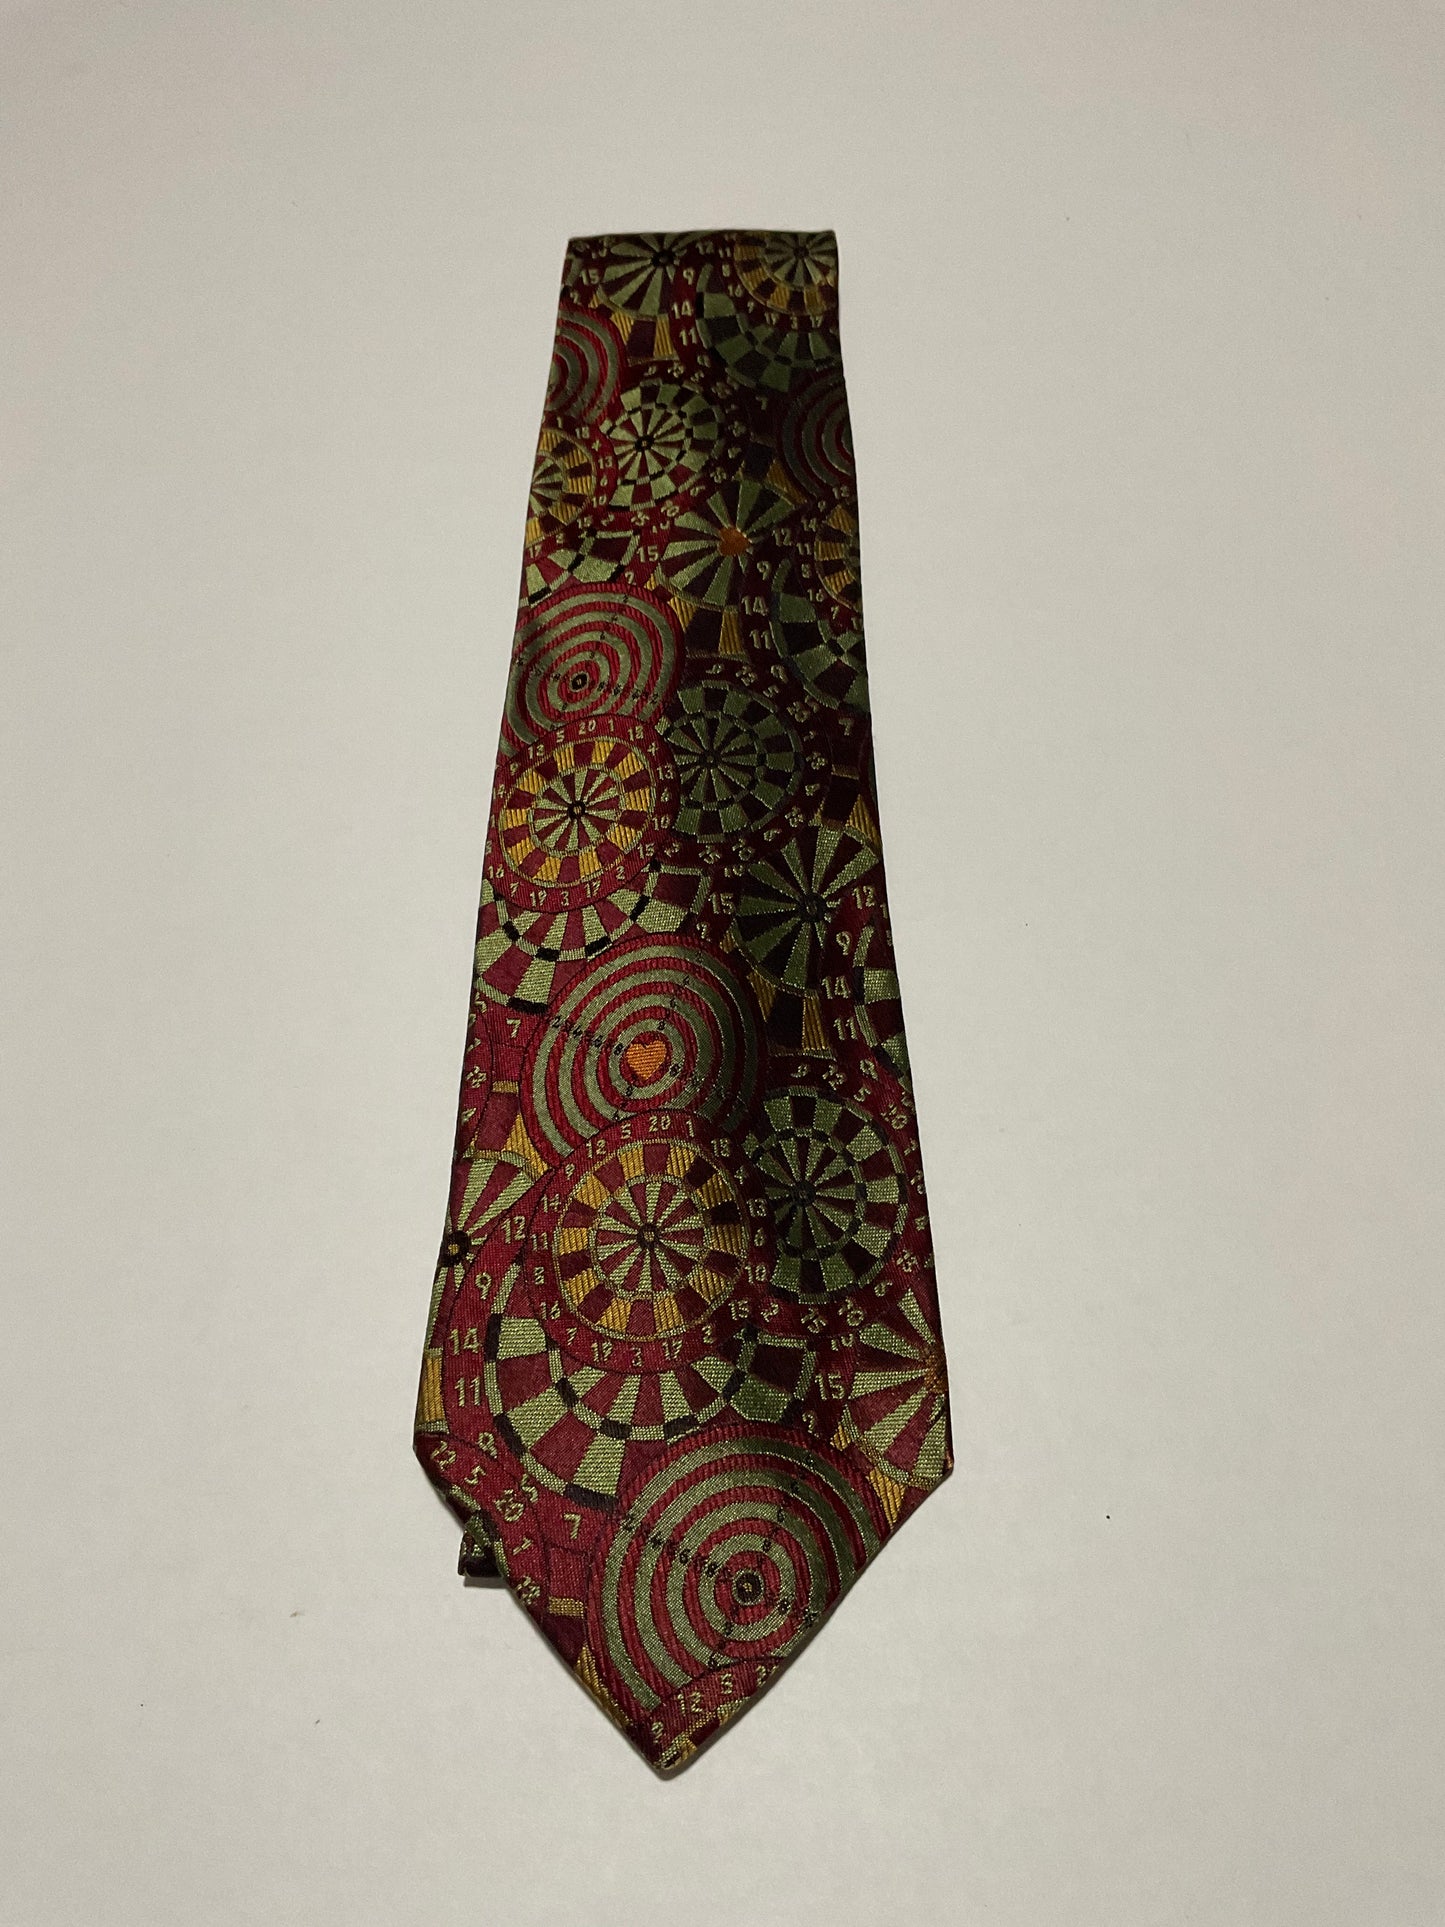 TIE / PURE SILK / NEW / APPX. 3 3/4” WIDE / MOSCHINO / HAND MADE IN ITALY